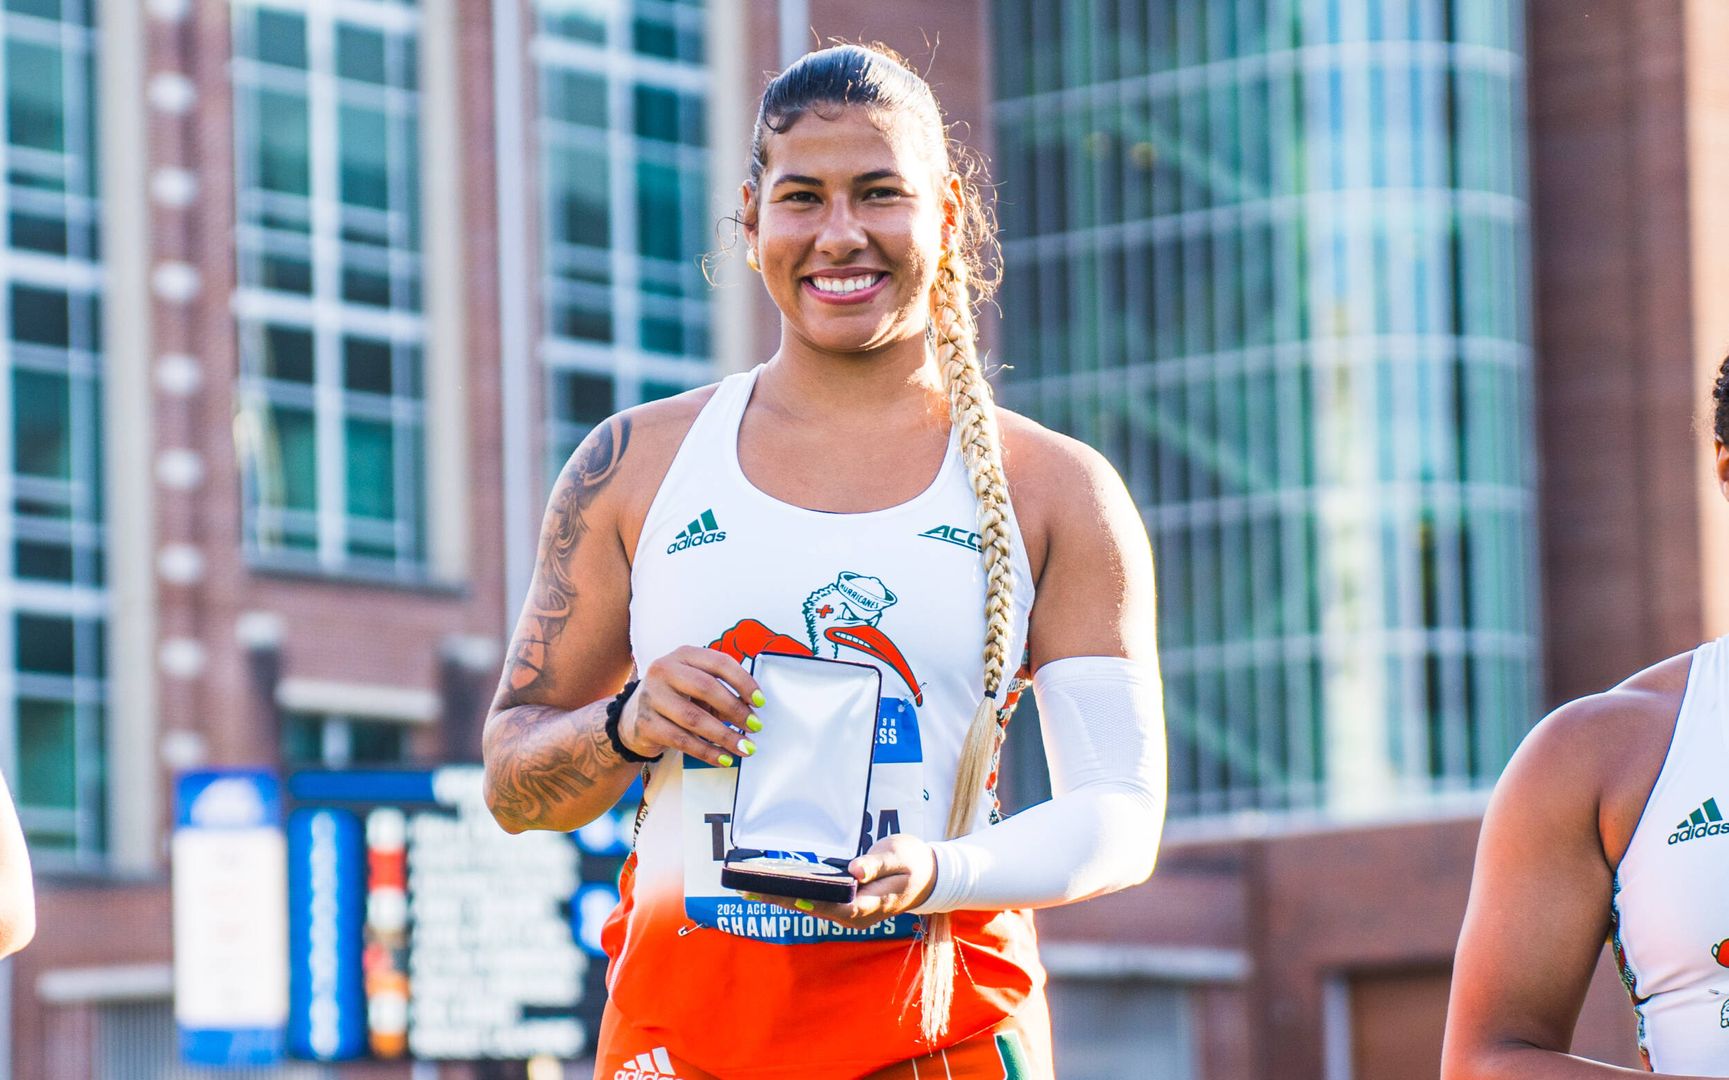 Teixeira Crowned ACC Champion Following Historic Javelin Performance